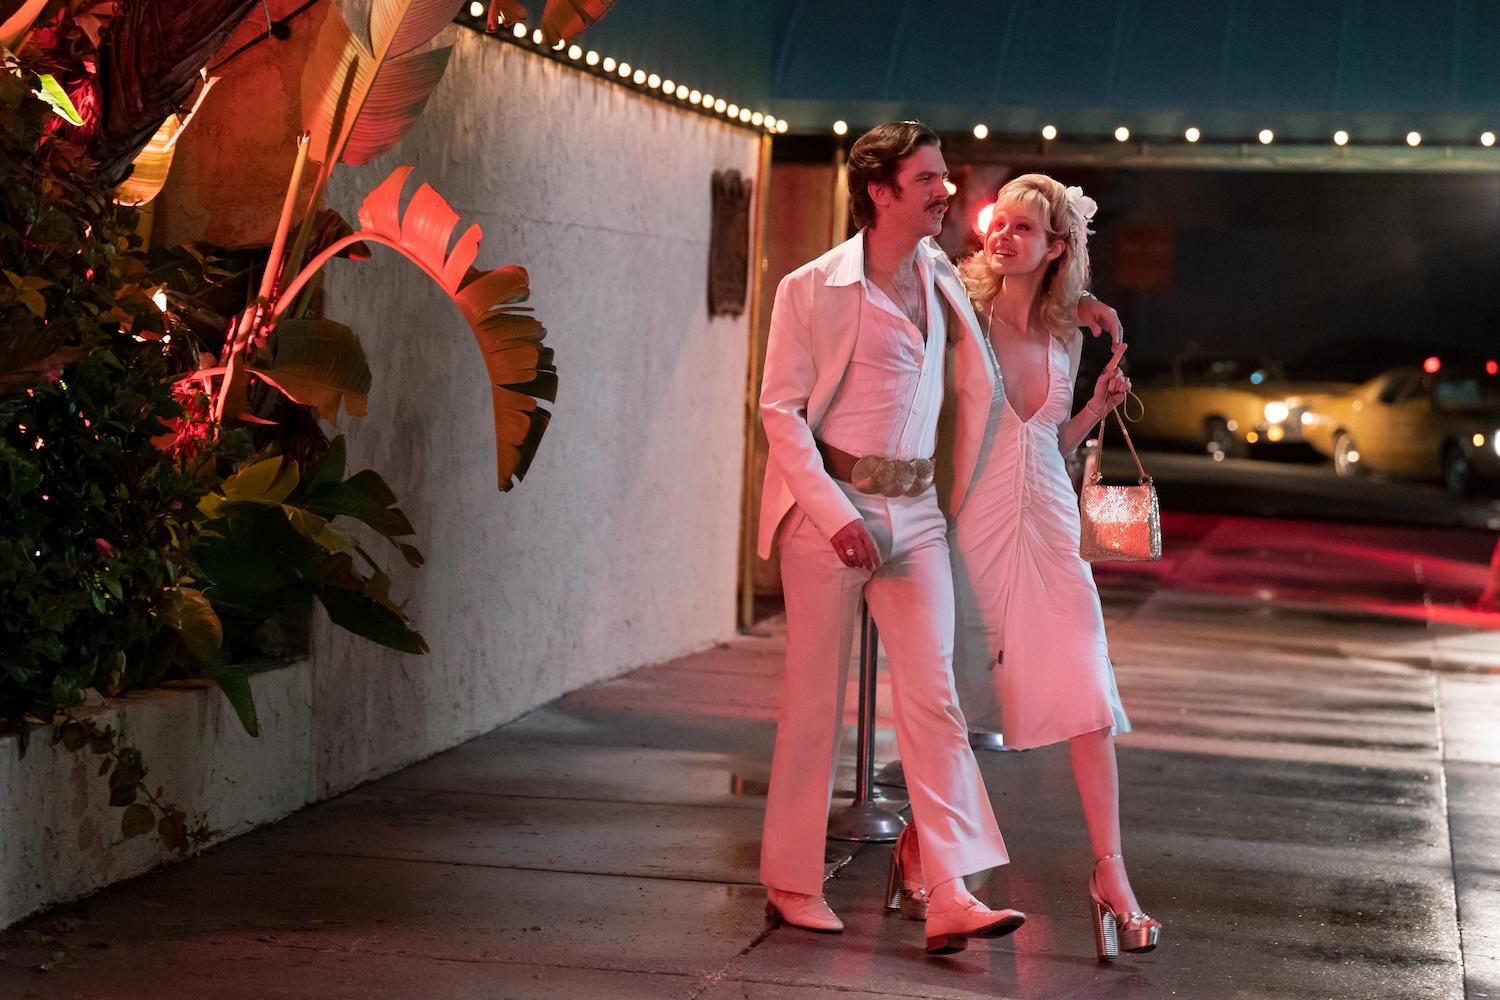 'Welcome to Chippendales' stars Dan Stevens and Nicola Peltz Beckham as Paul Snider and Dorothy Stratten, seen here in a production still walking out of a nightclub while both wear all white.